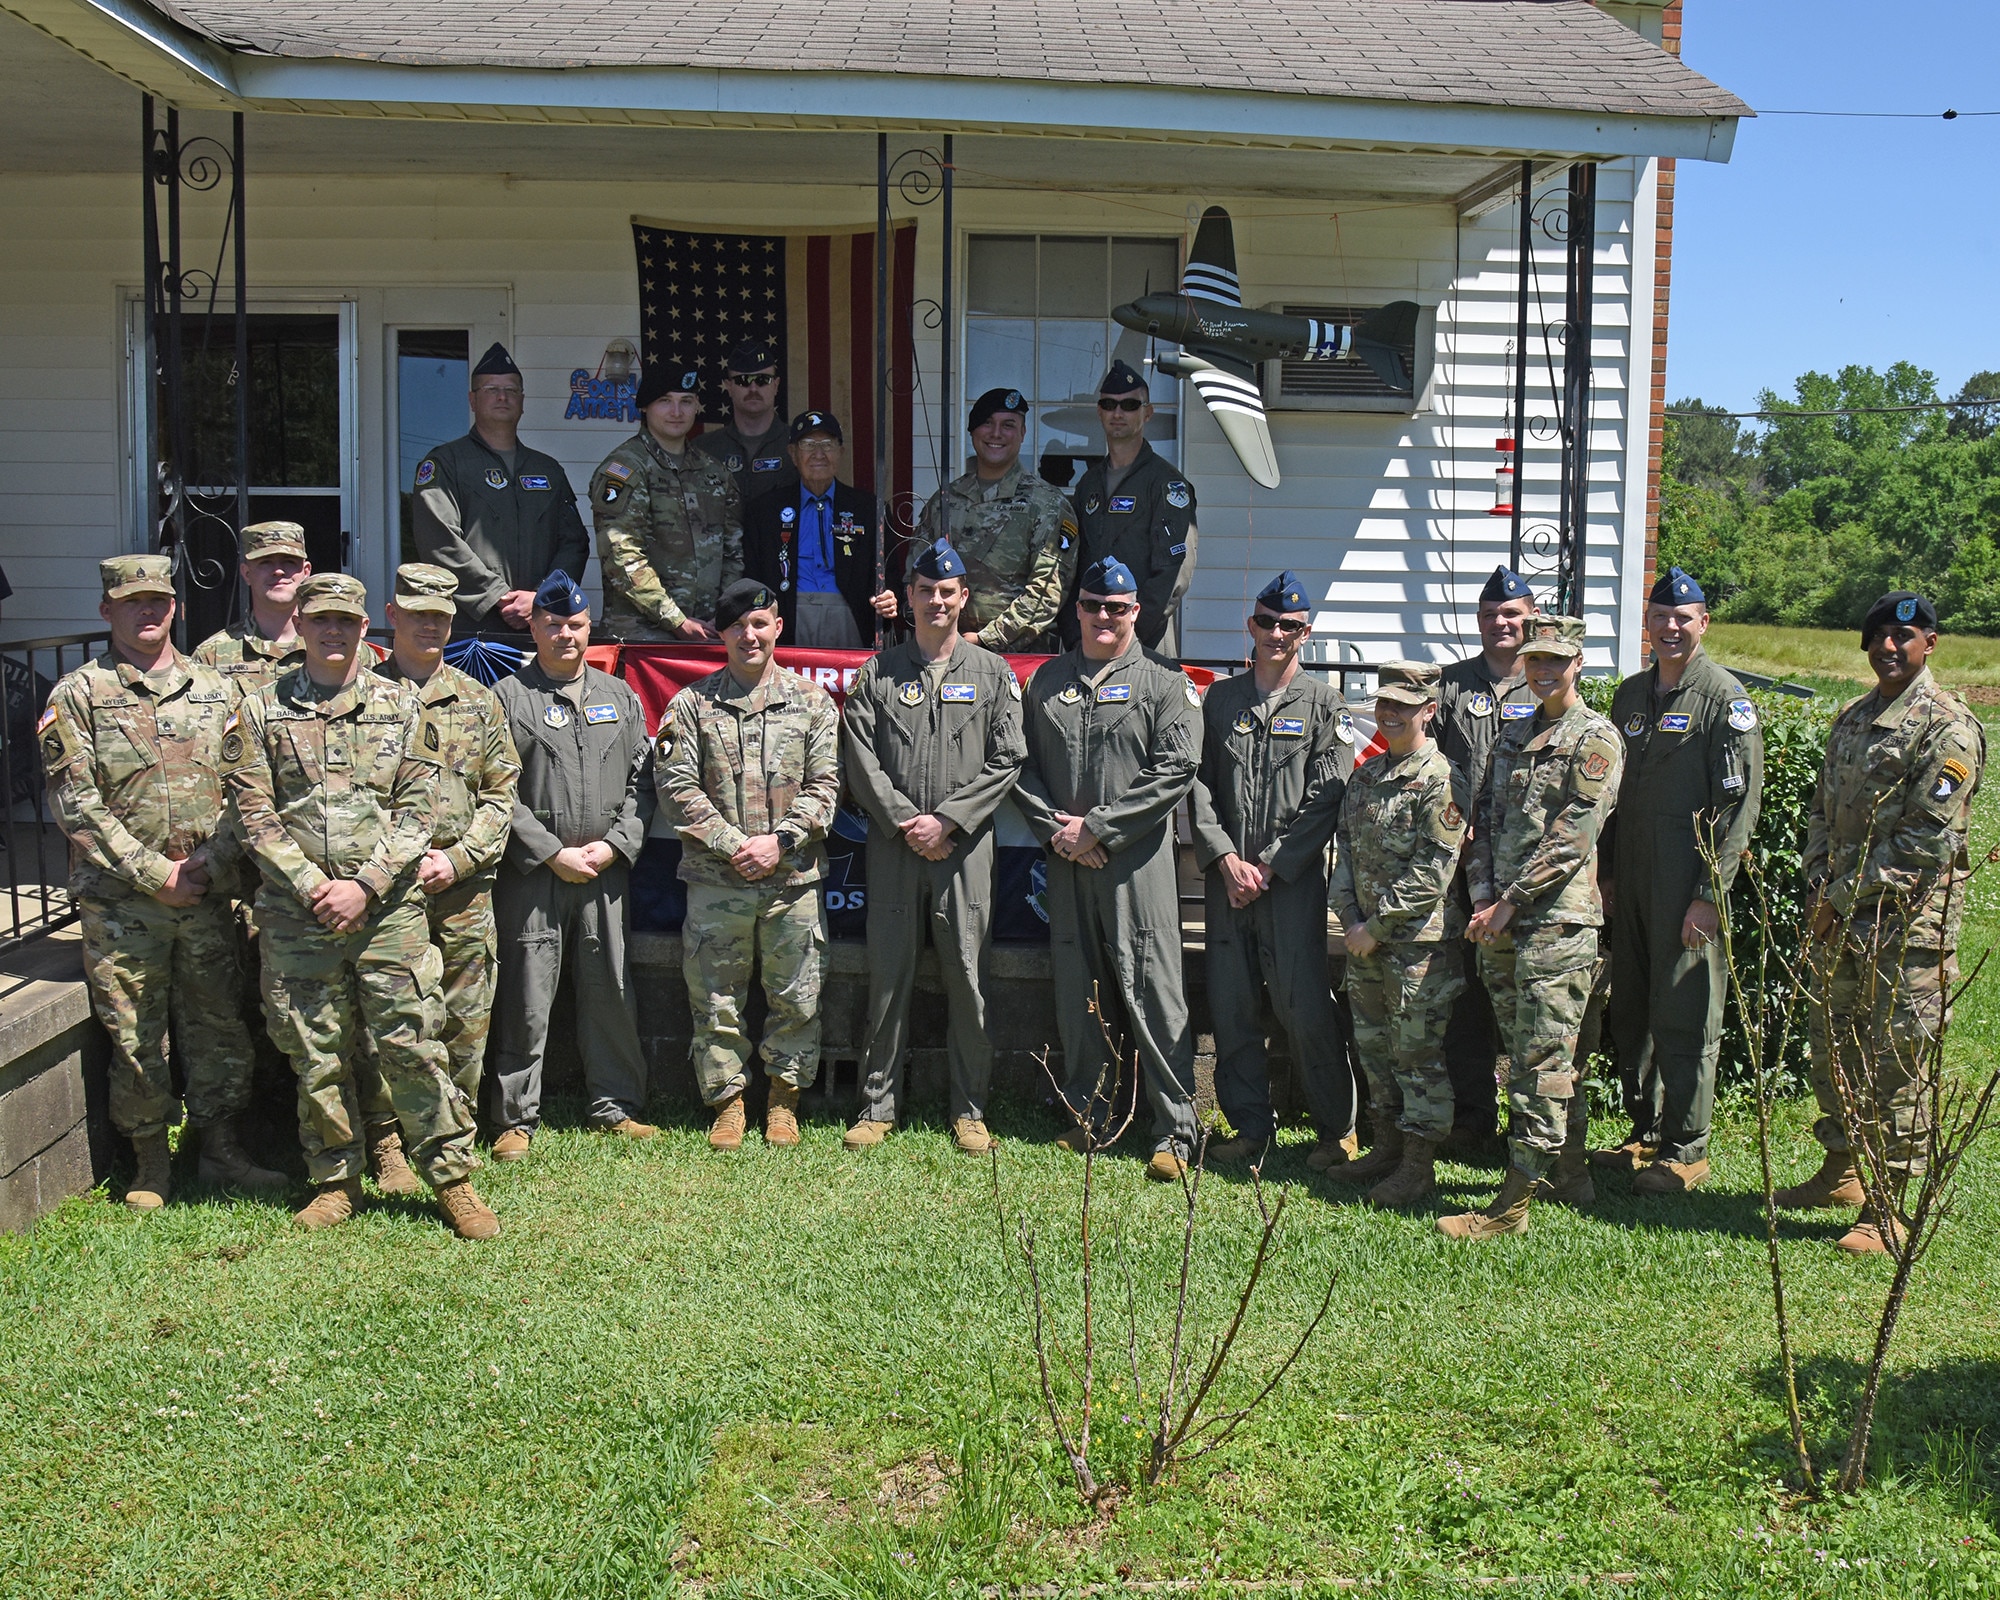 Military members pose with a WWII veteran outside his home.